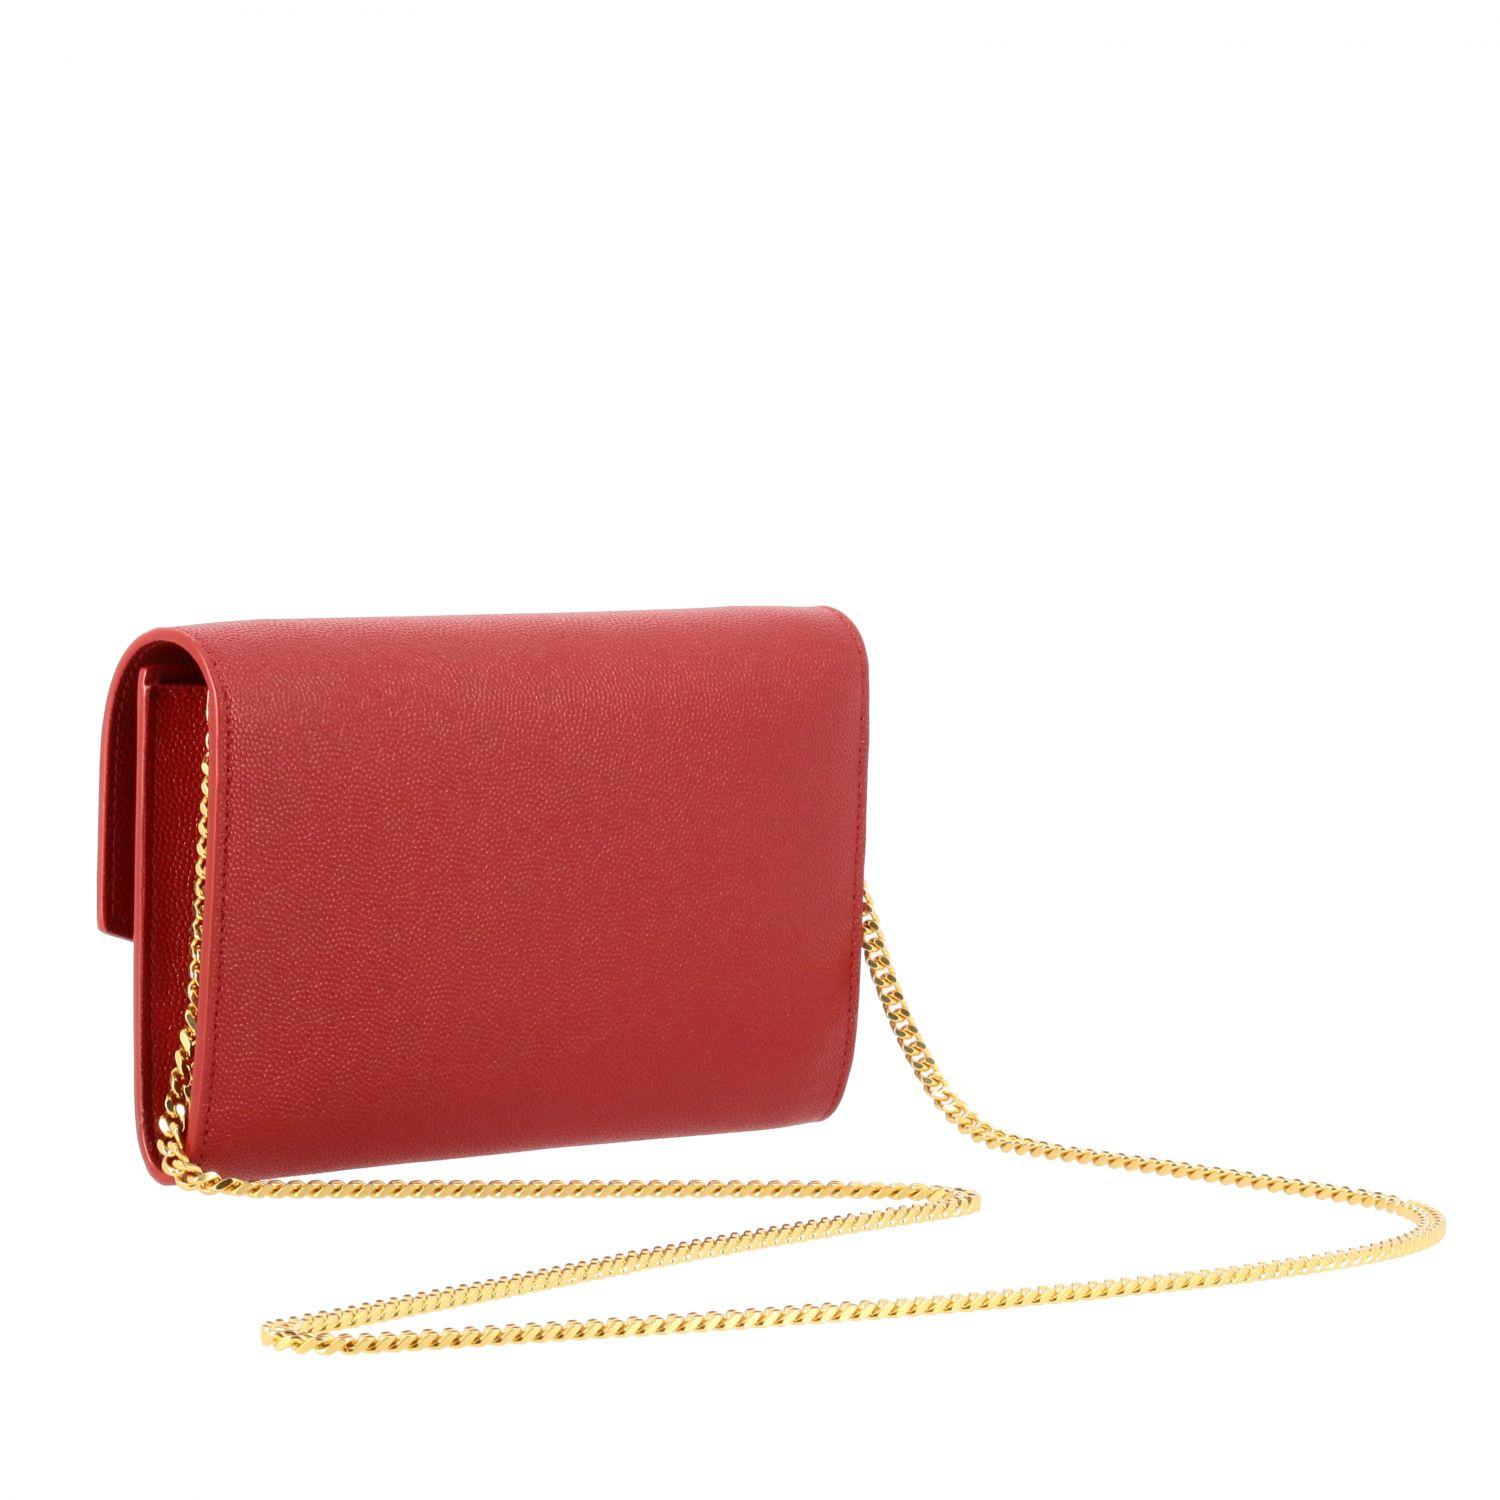 Saint Laurent Uptown Pebbled Calfskin Leather Wallet on a Chain